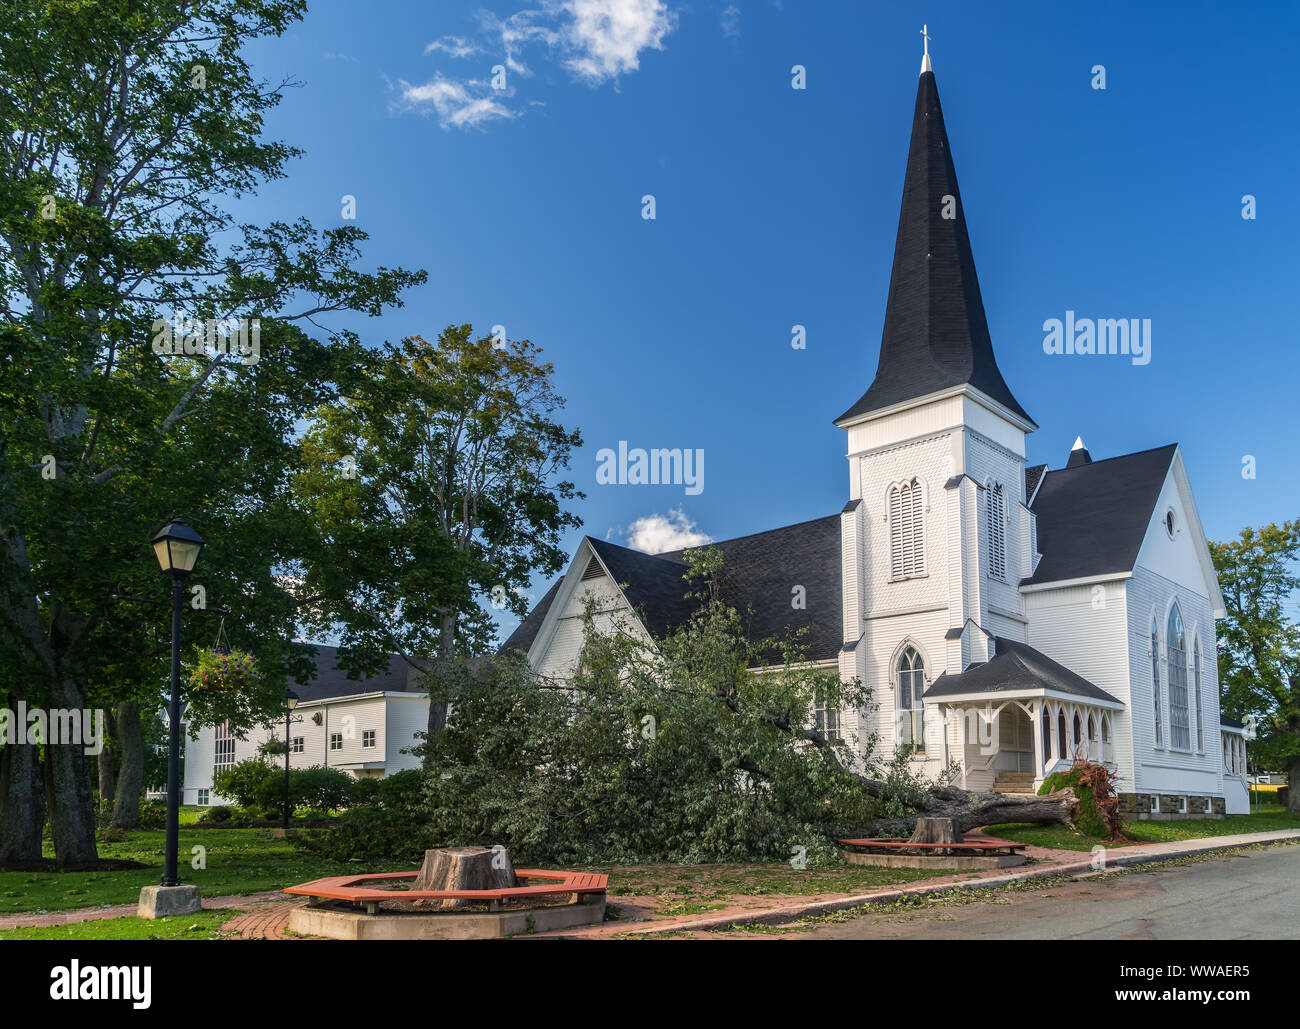 Damage to a church property from Hurricane Dorian. Stock Photo